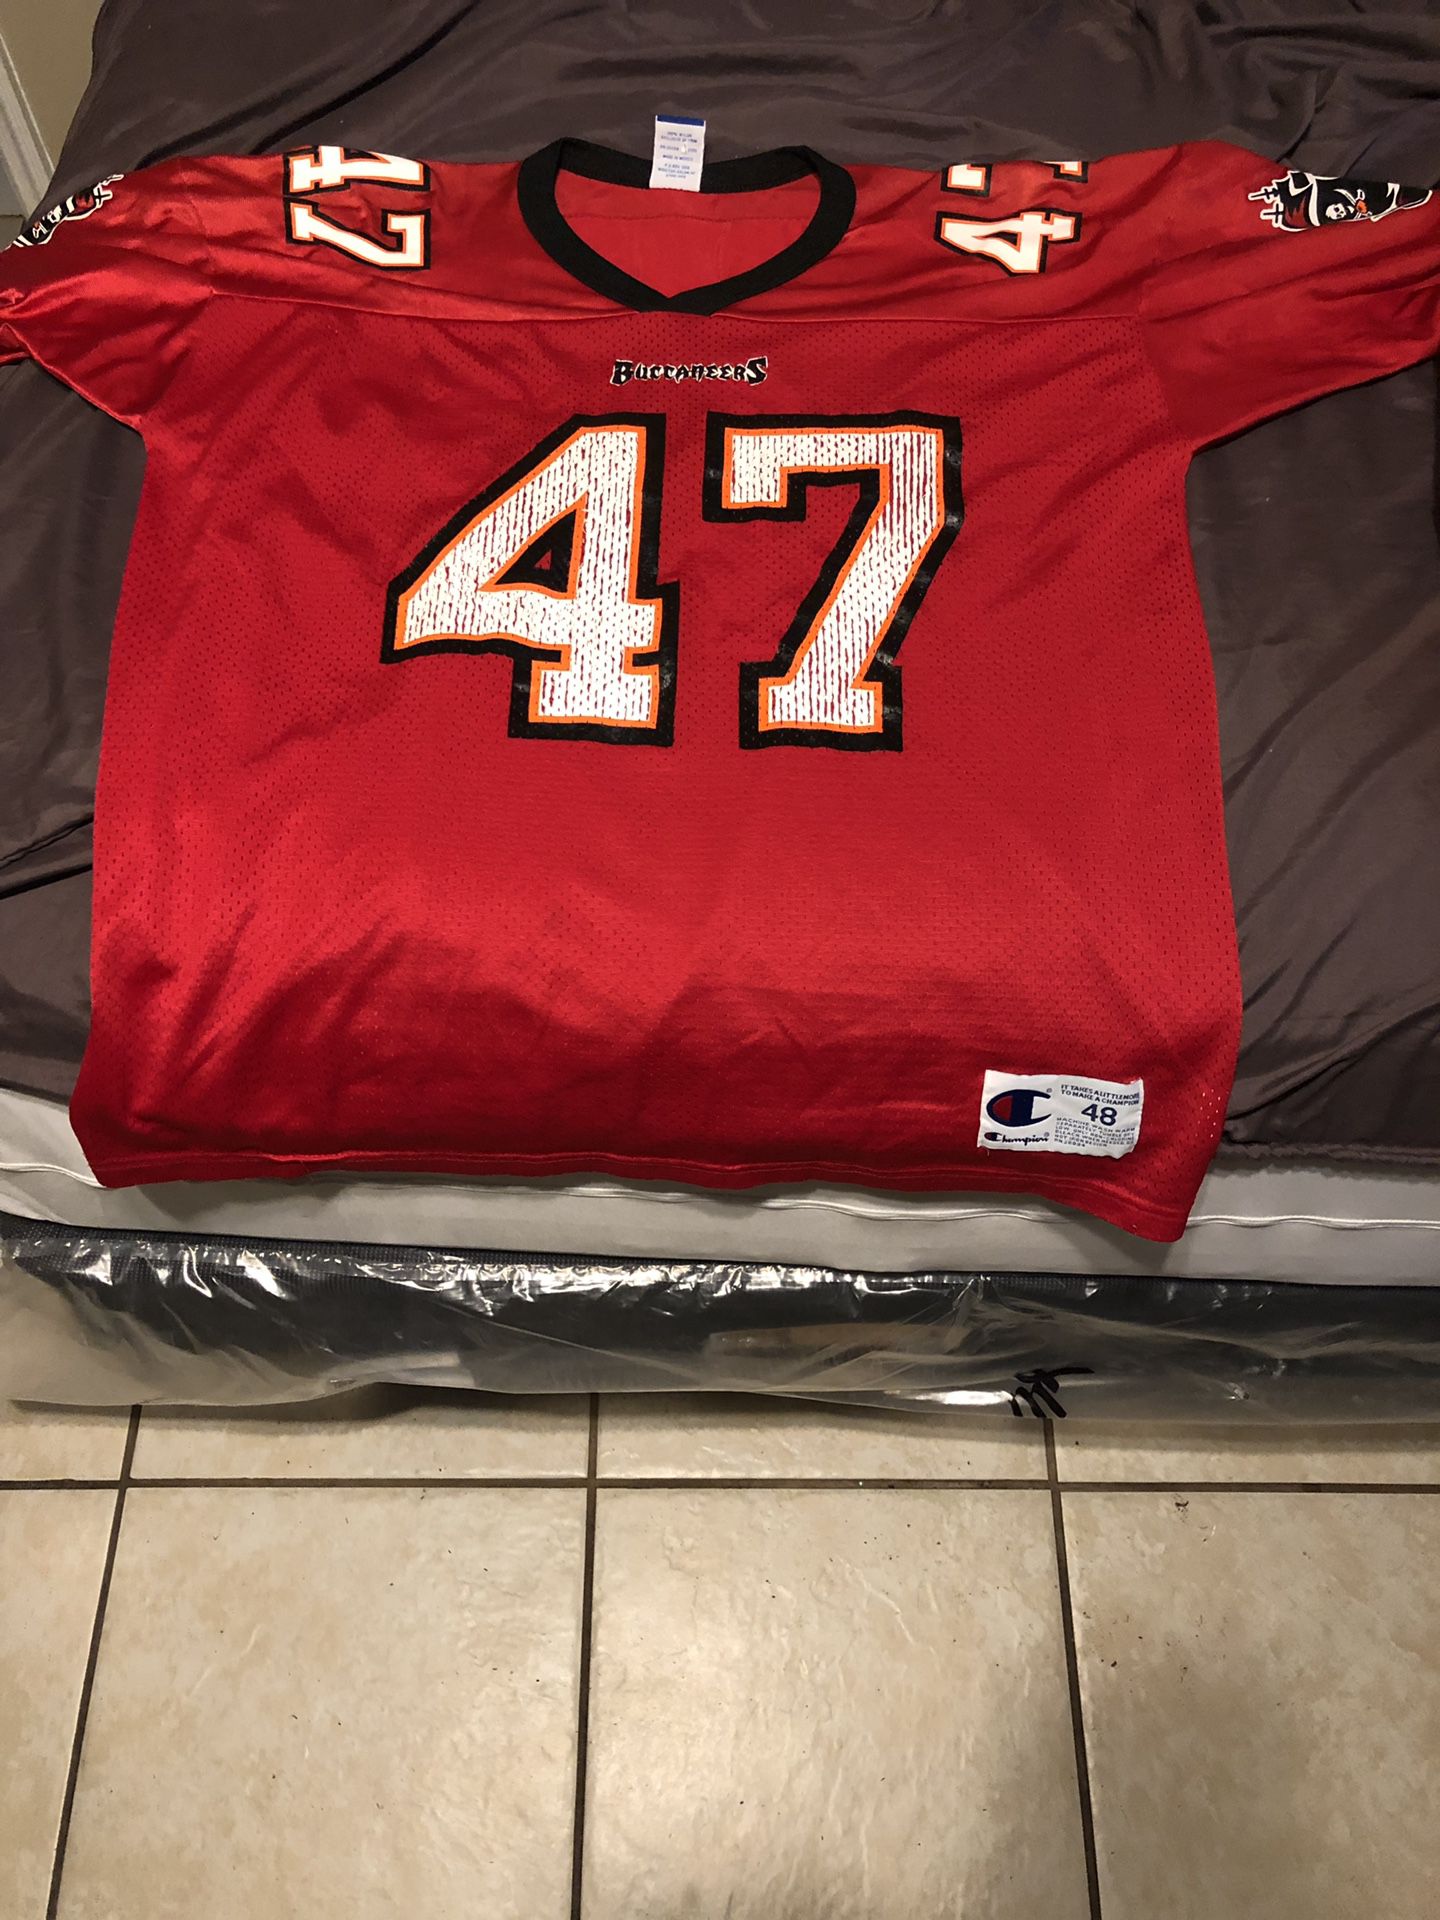 Tampa bay buccaneers jerseys for Sale in Spring Hill, FL - OfferUp